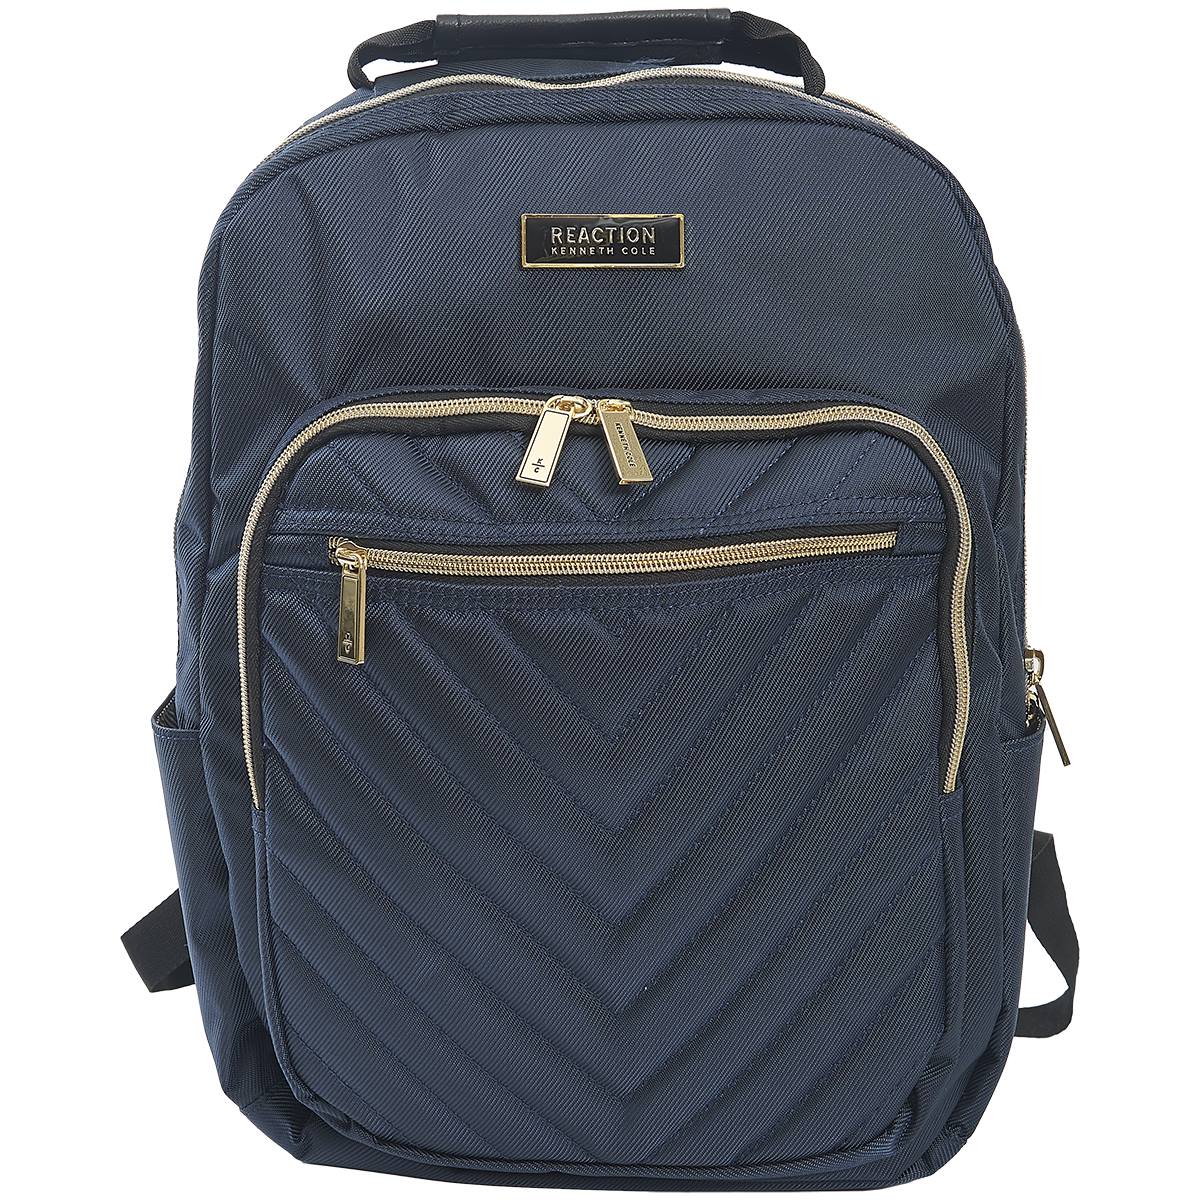 Kenneth Cole(R) Reaction(tm) Quilted Black & Gold Backpack